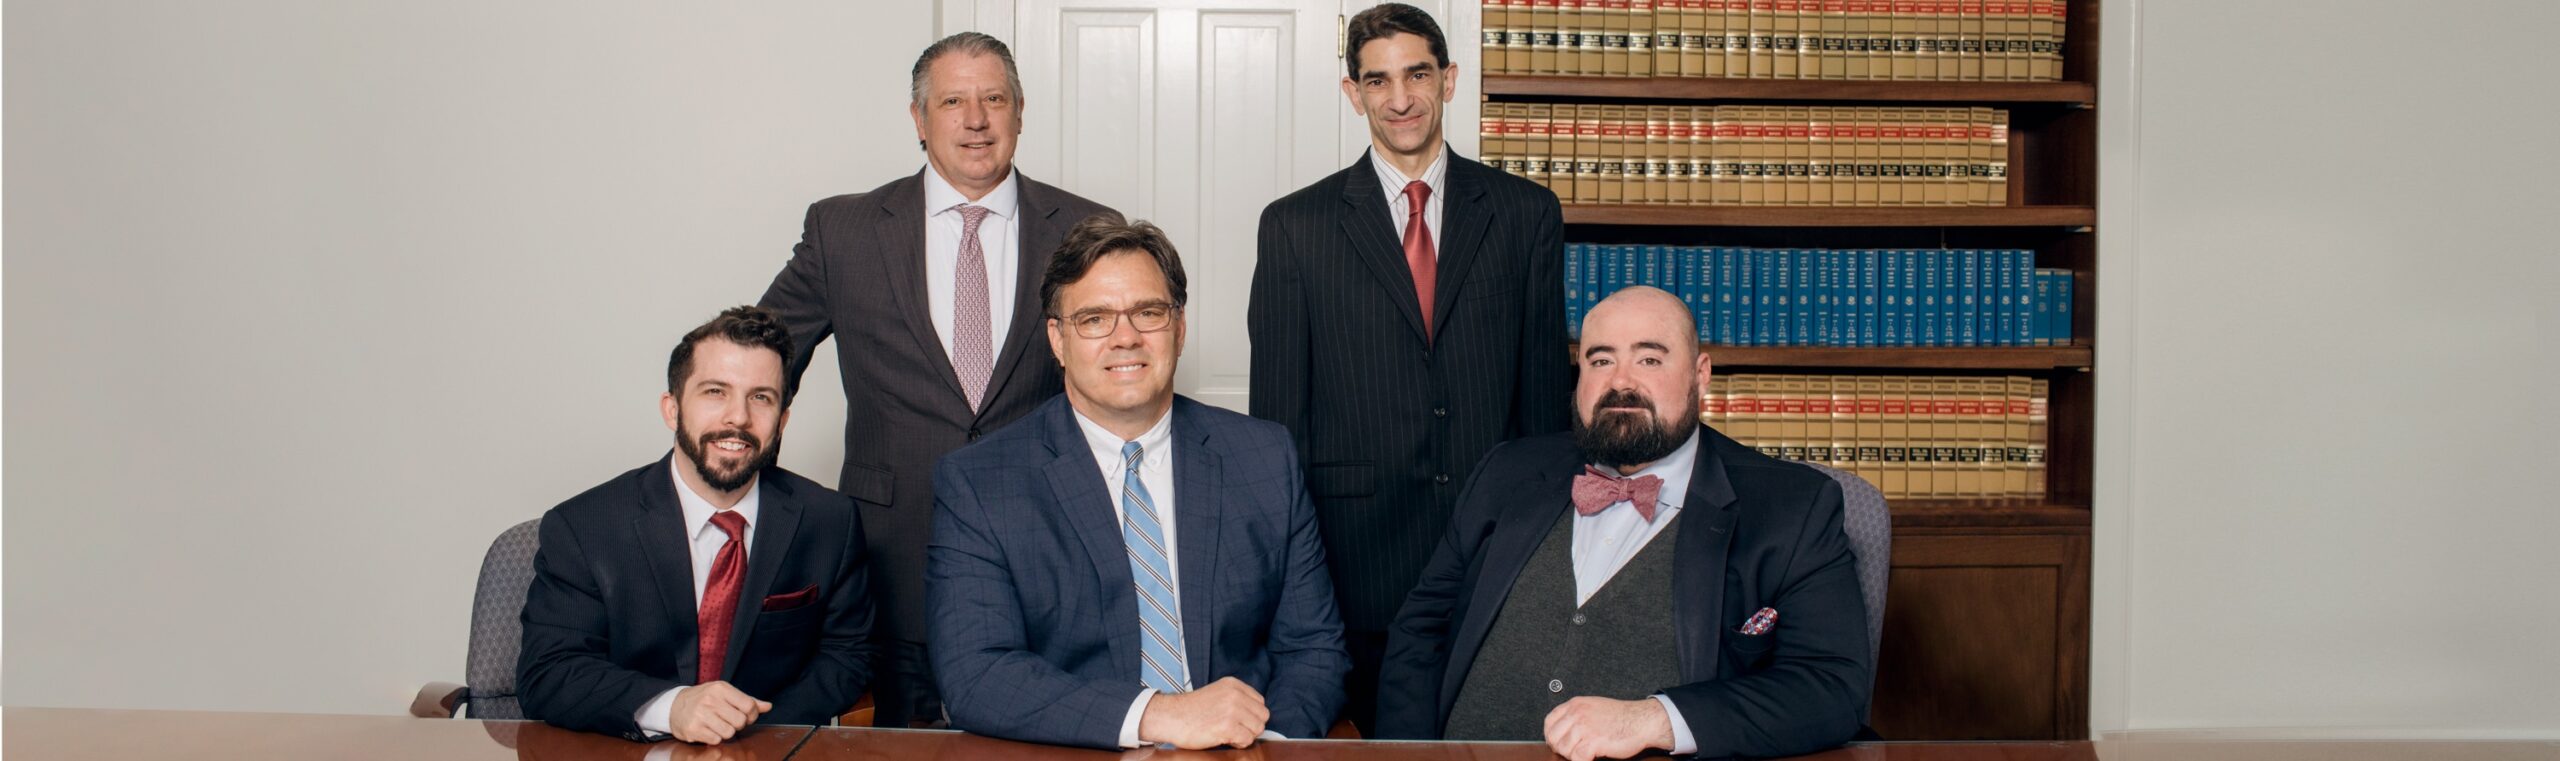 Attorneys J. Joy, J. Andriola, S. Caruthers, J. Alissi and D. Mello, New Haven and Hartford, CT